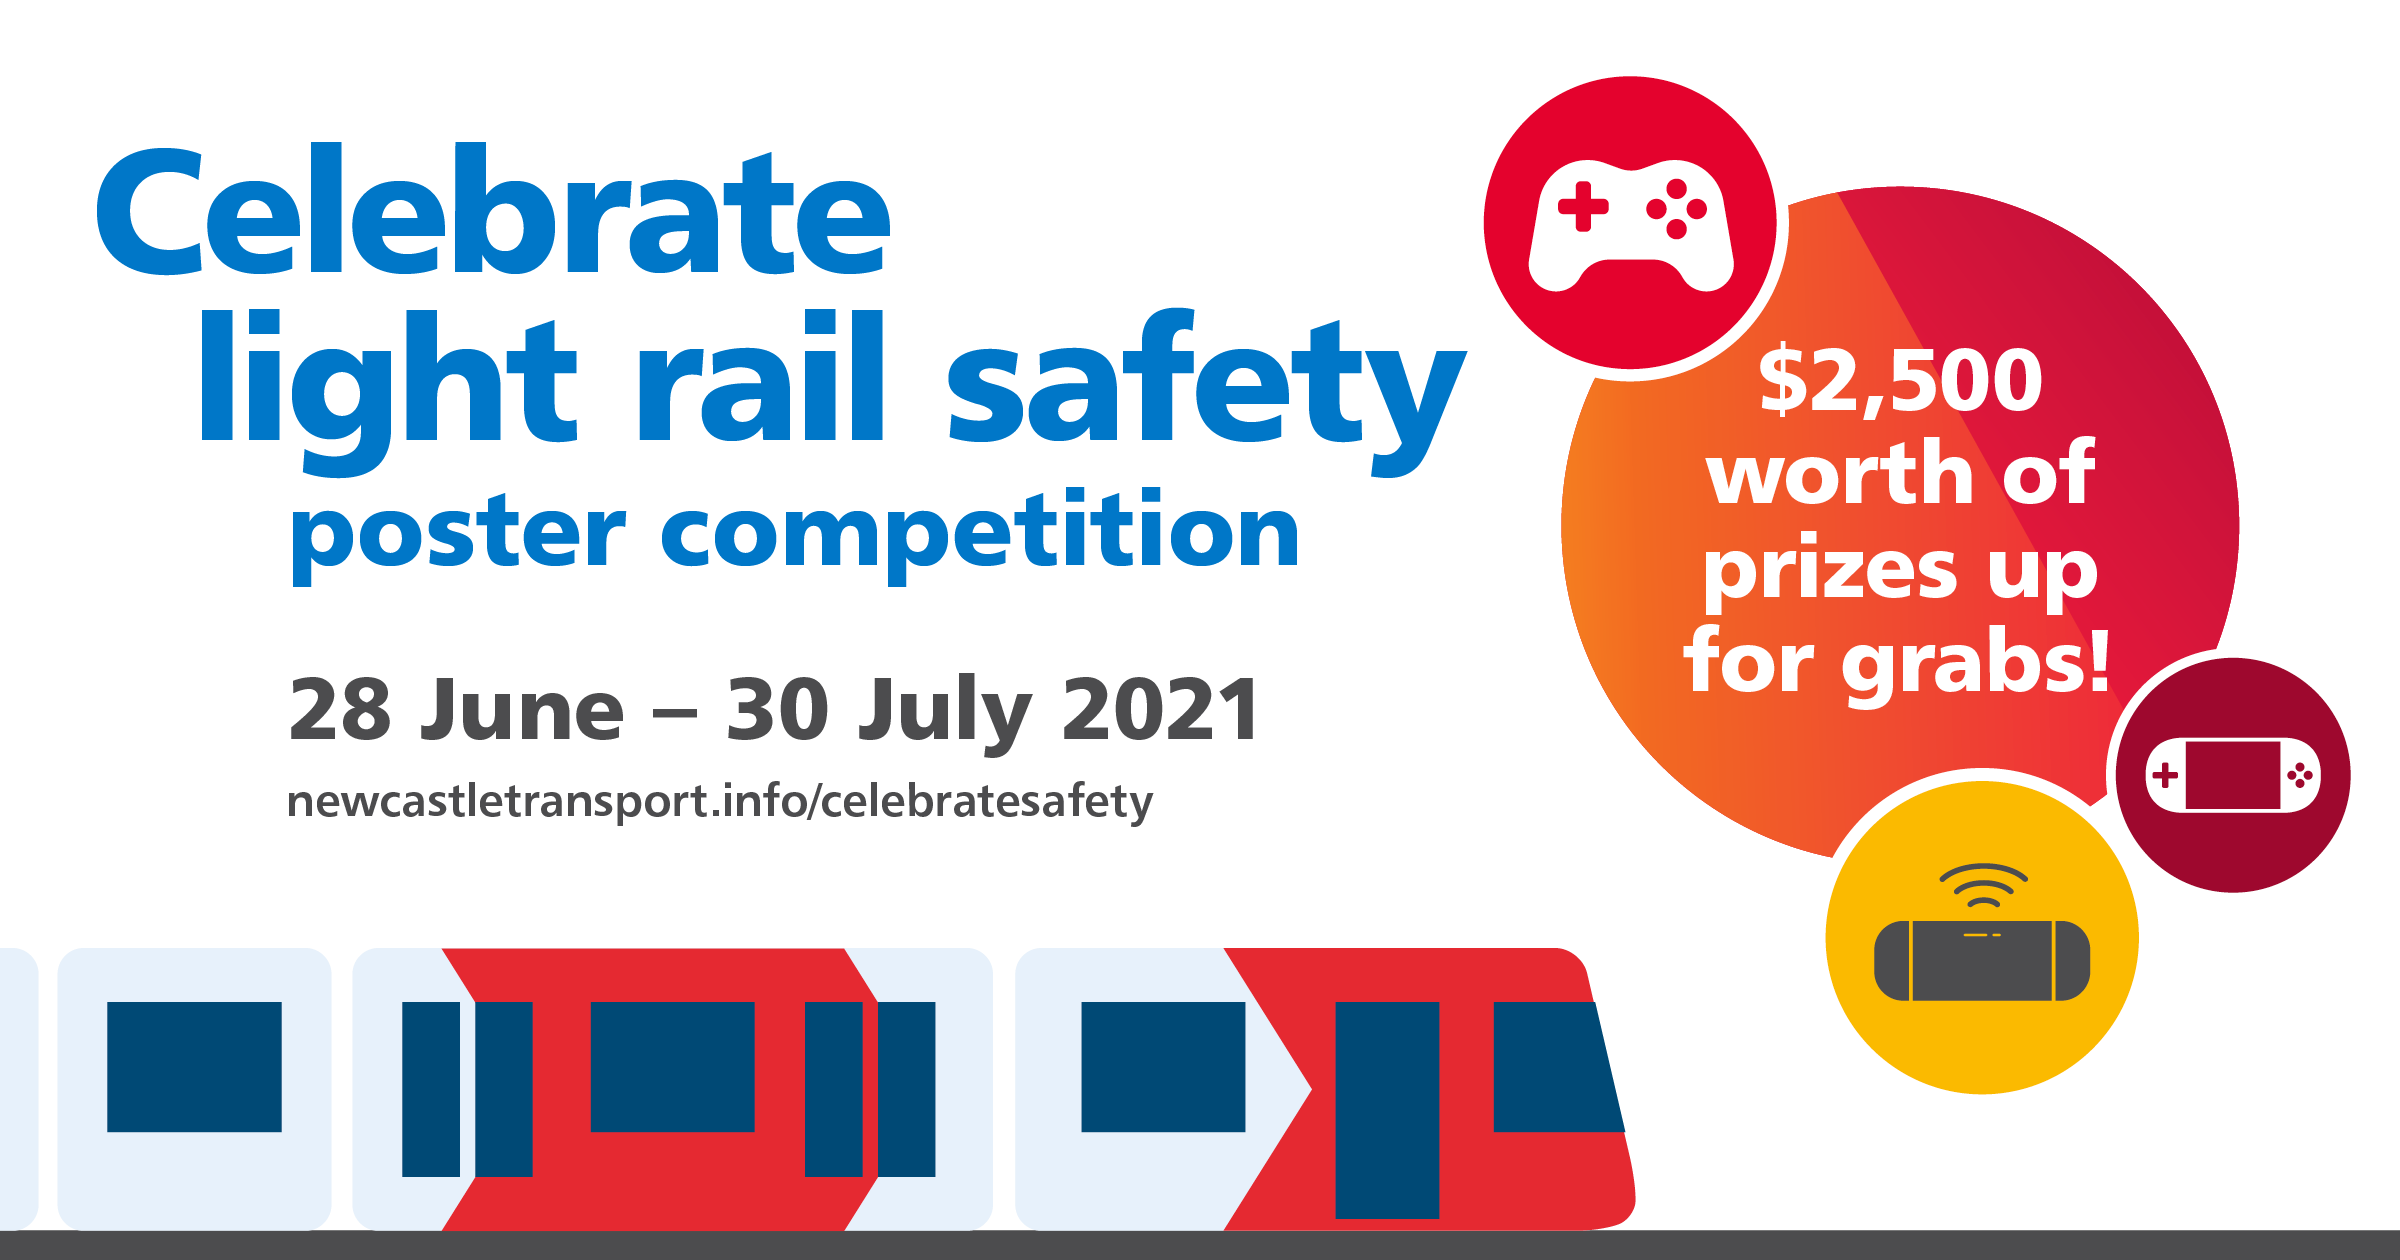 Celebrate light rail safety poster competition. 28 June - 30 July 2021. $2500 worth of prizes up for grabs.